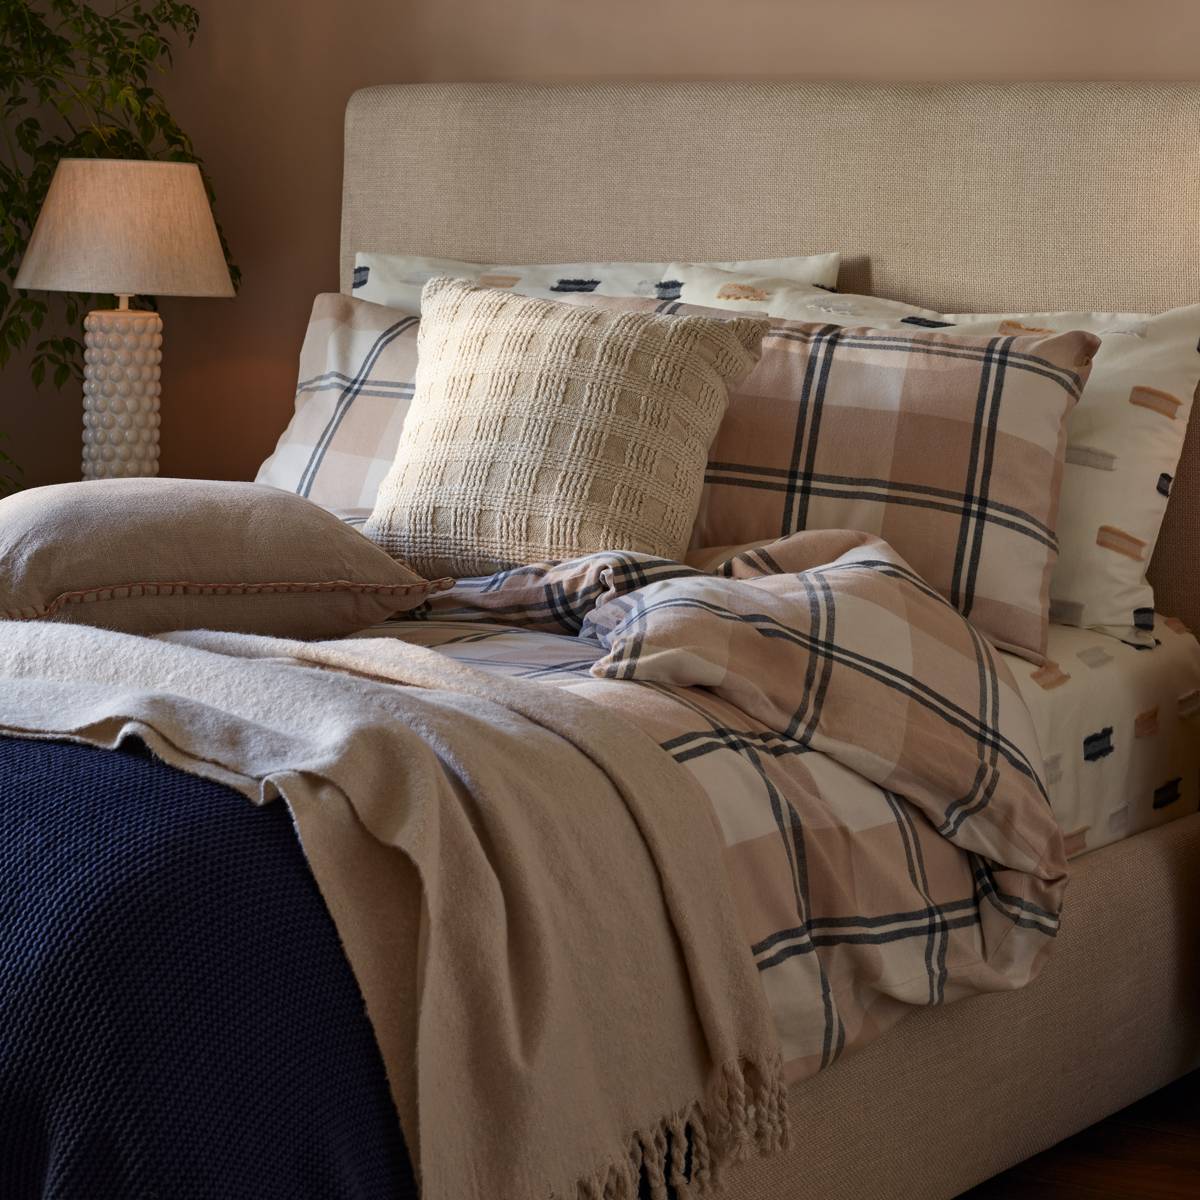 Bed made up with patterned, neutral and navy bedding 